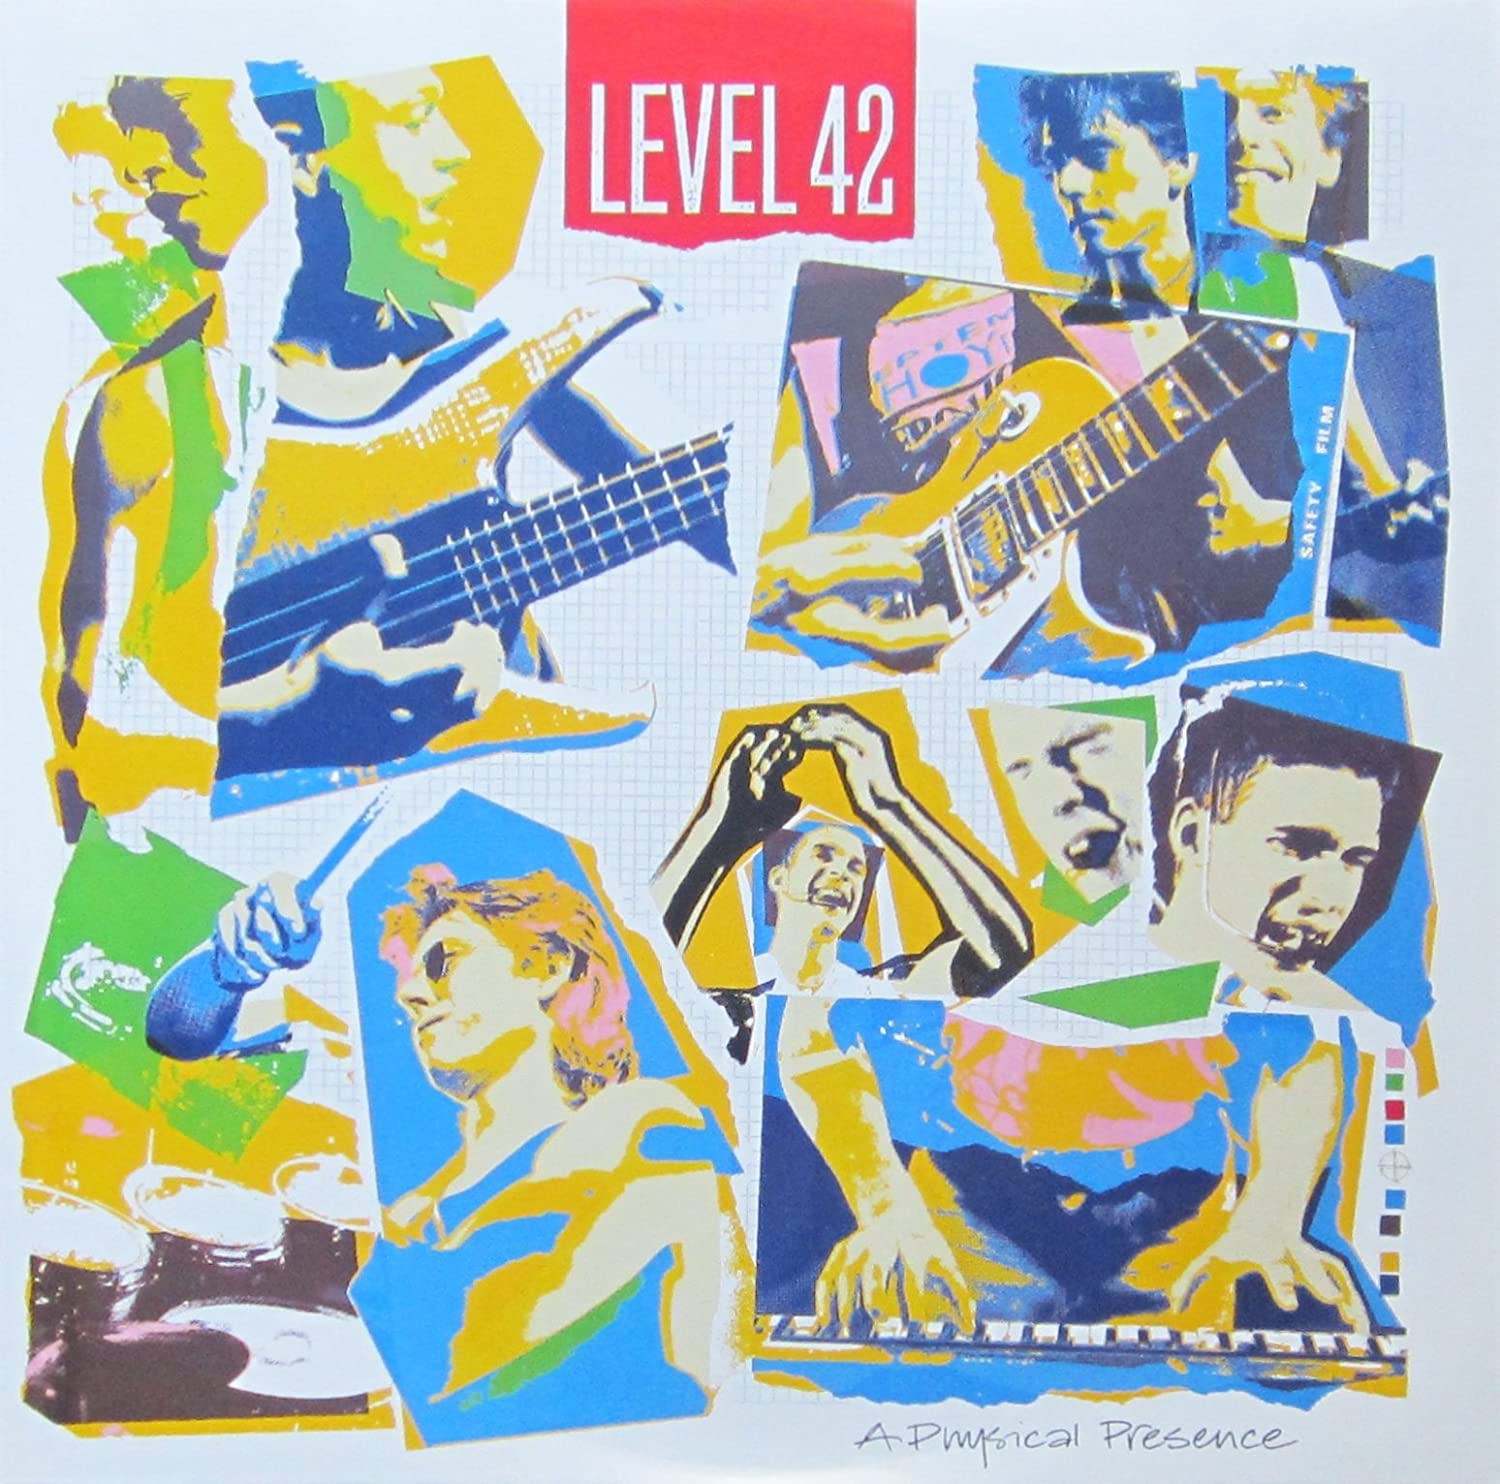 Level 42 - A Physical Presence (live) cover